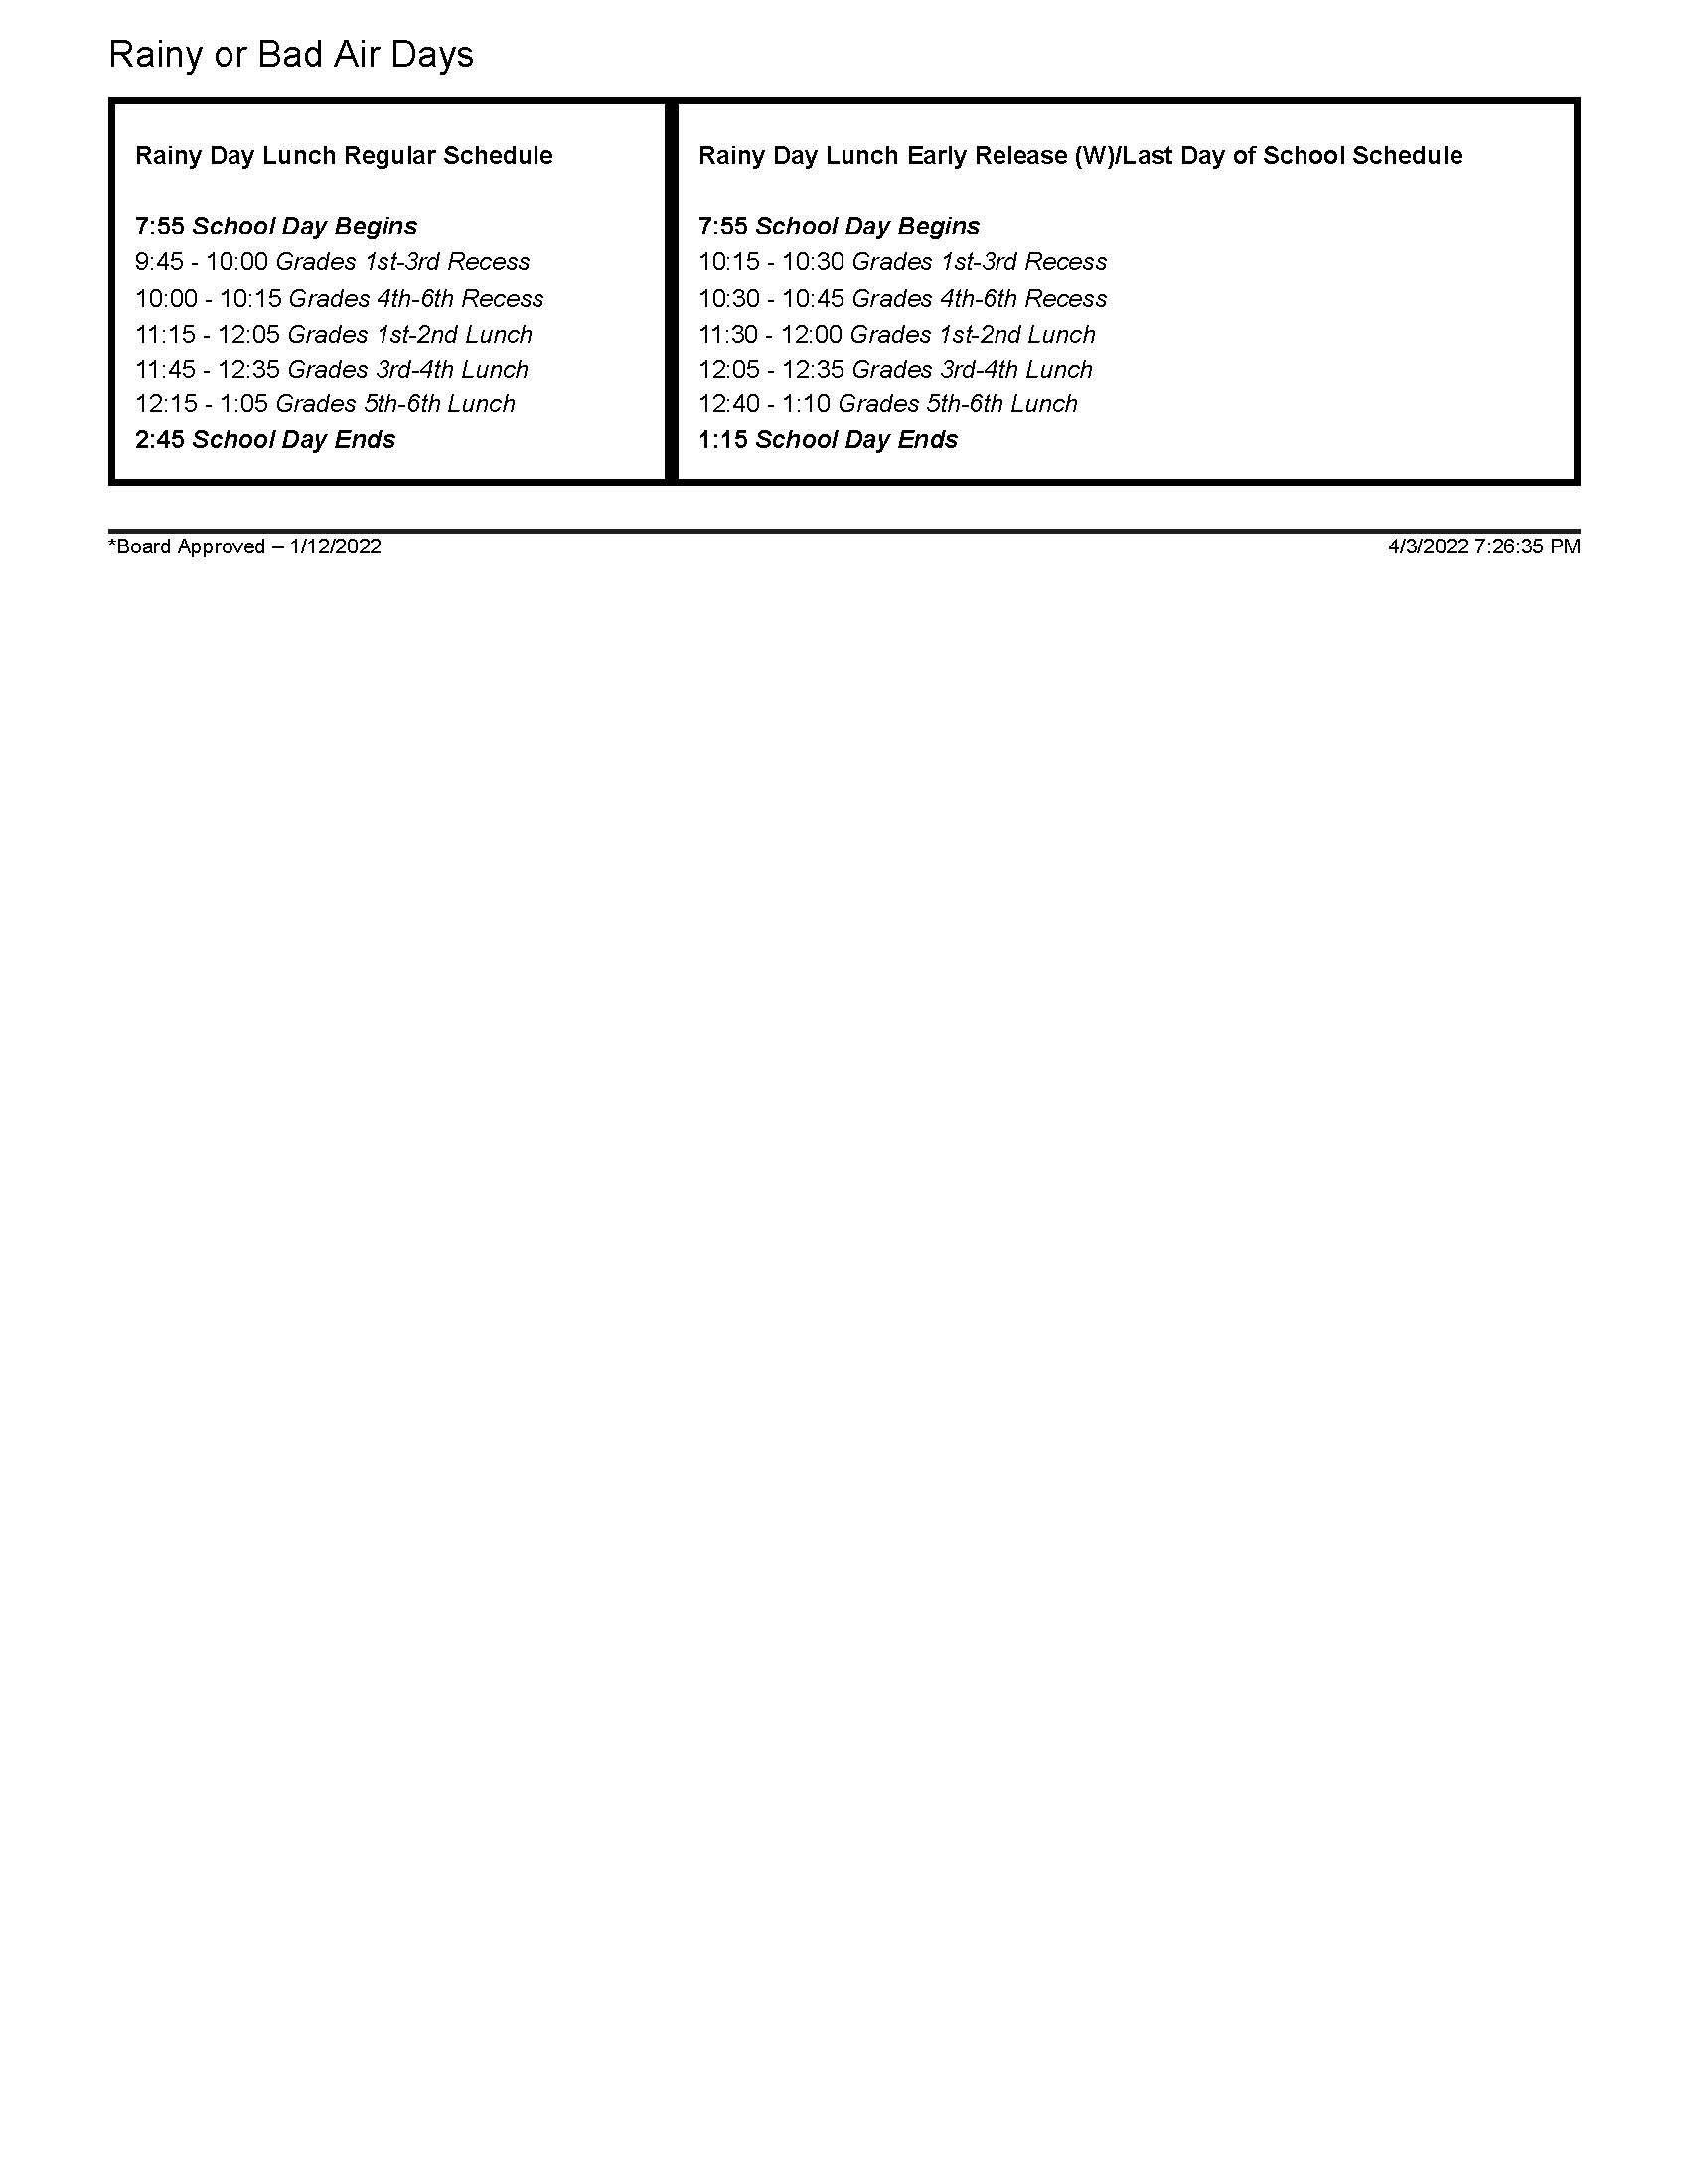 bell schedule - full text downloadable on page